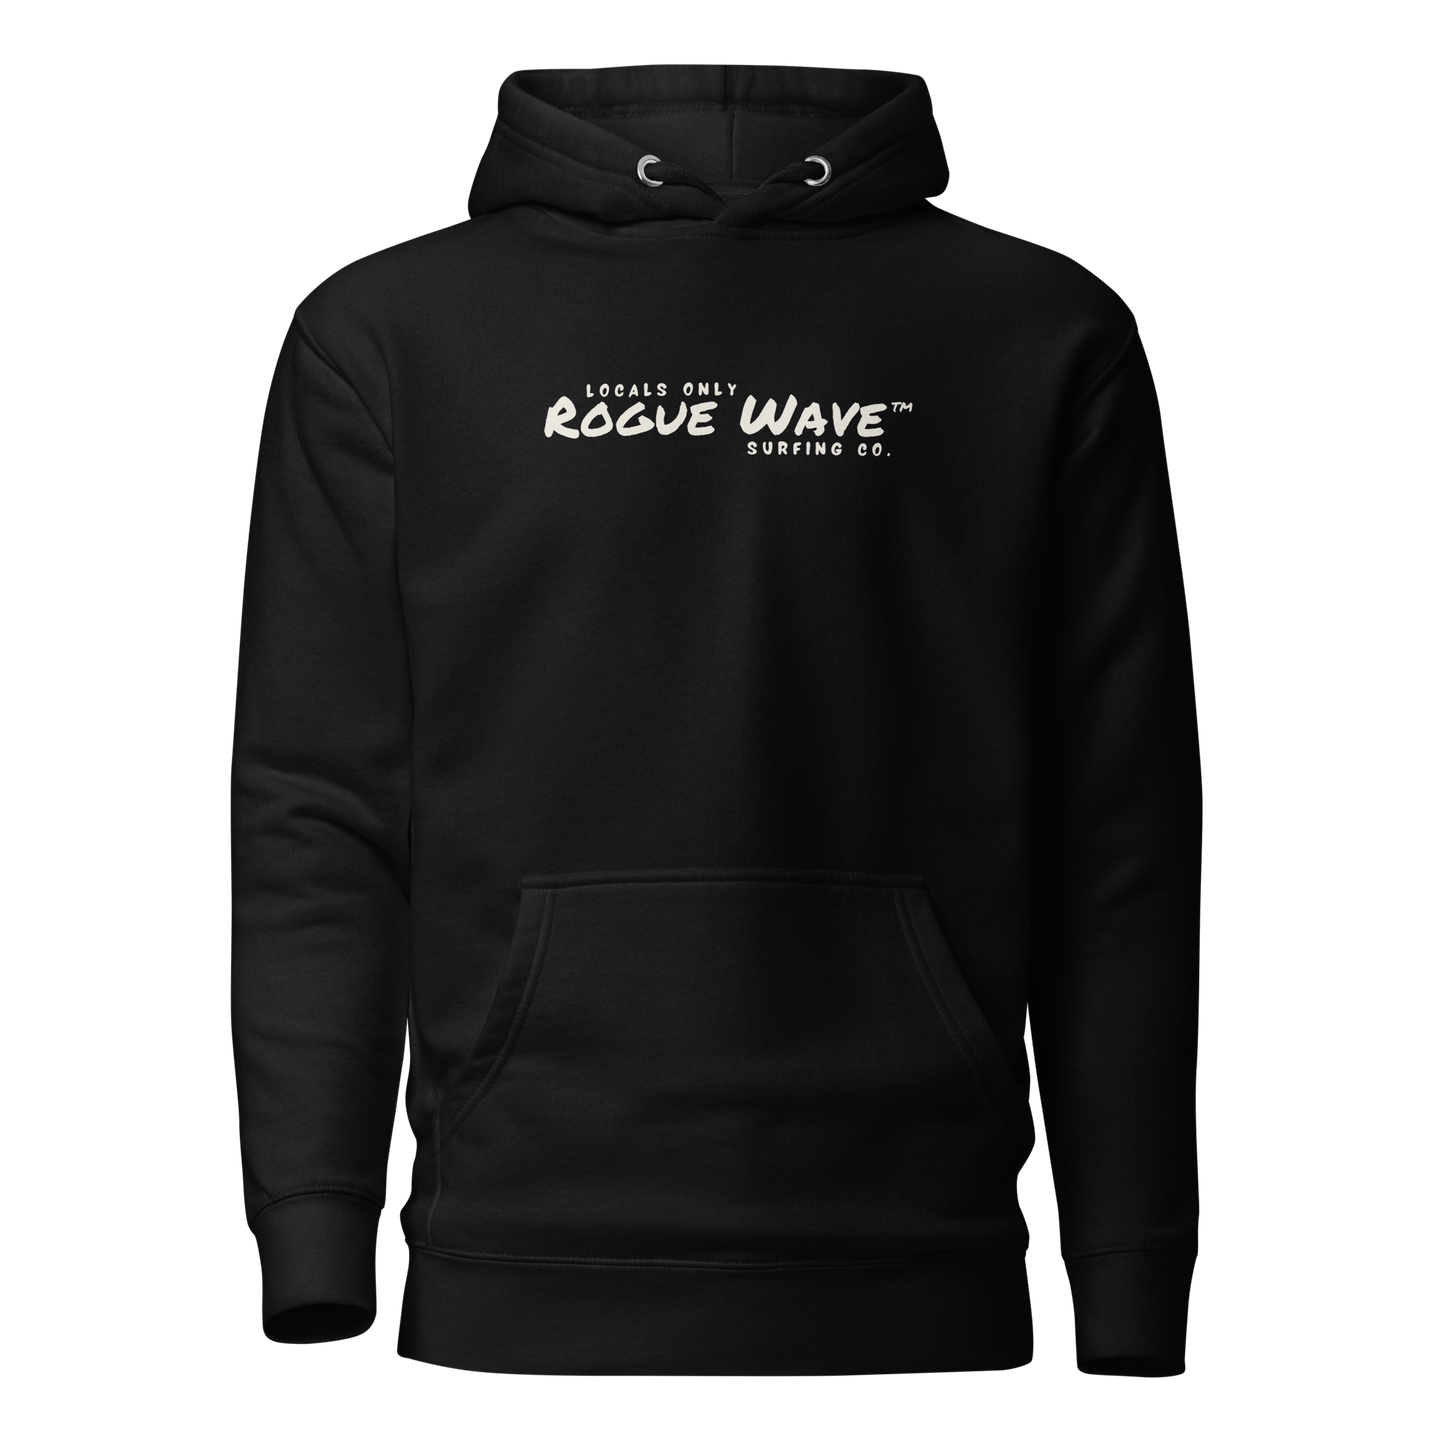 Rogue Wave Surfing Co™ Hoodie - Palm Tree